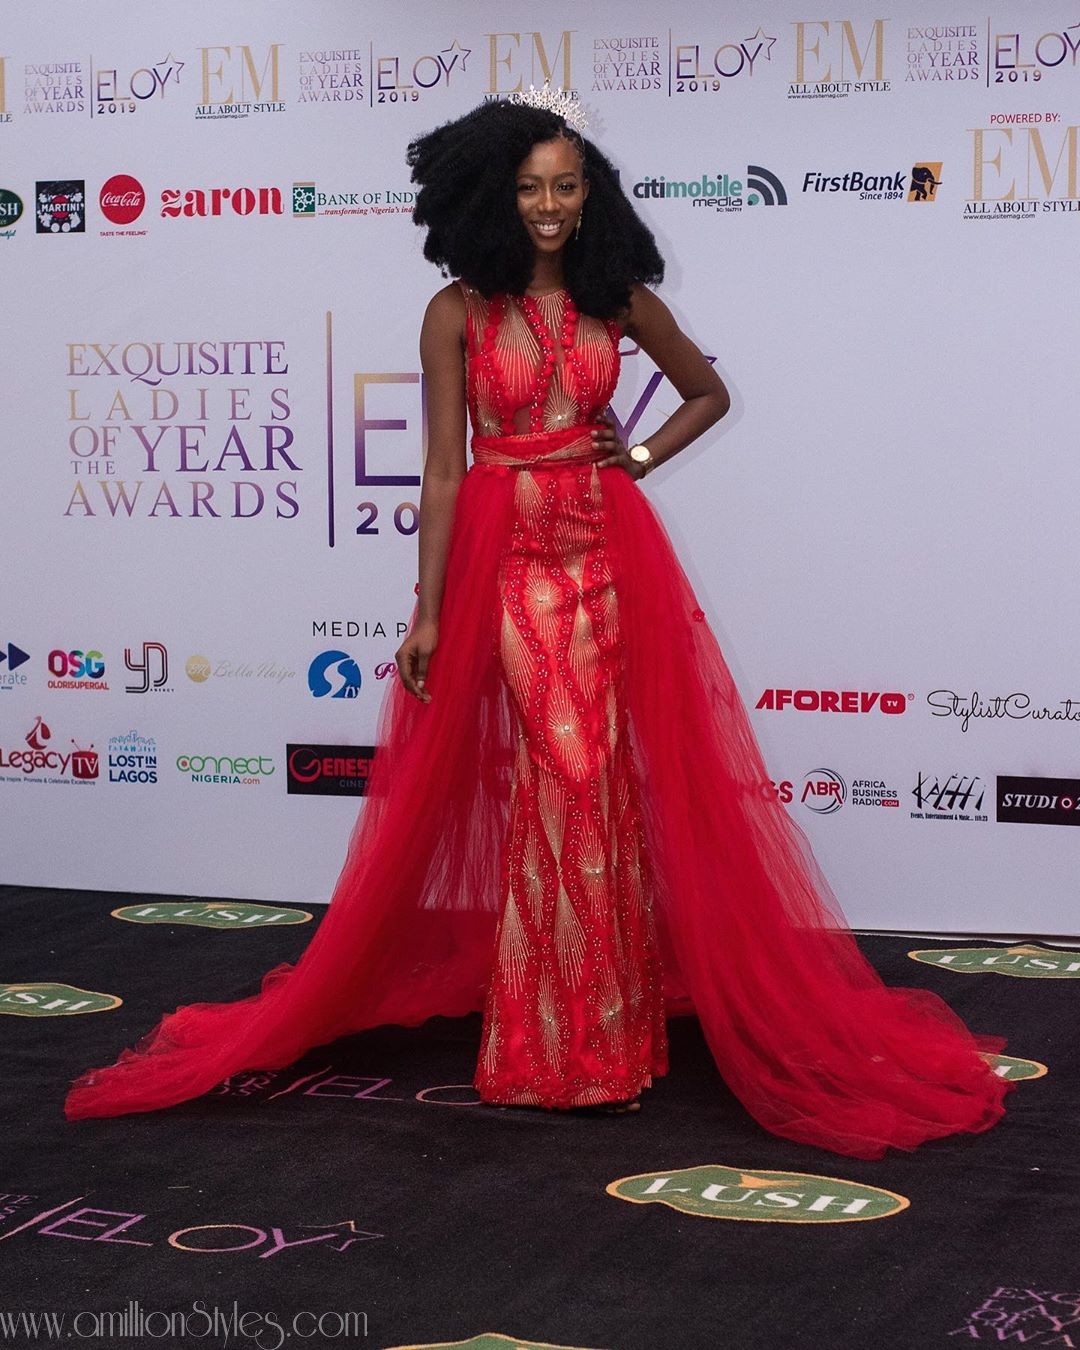 The Best Looks That Lit The Red Carpet Of The 2019 ELOY Awards